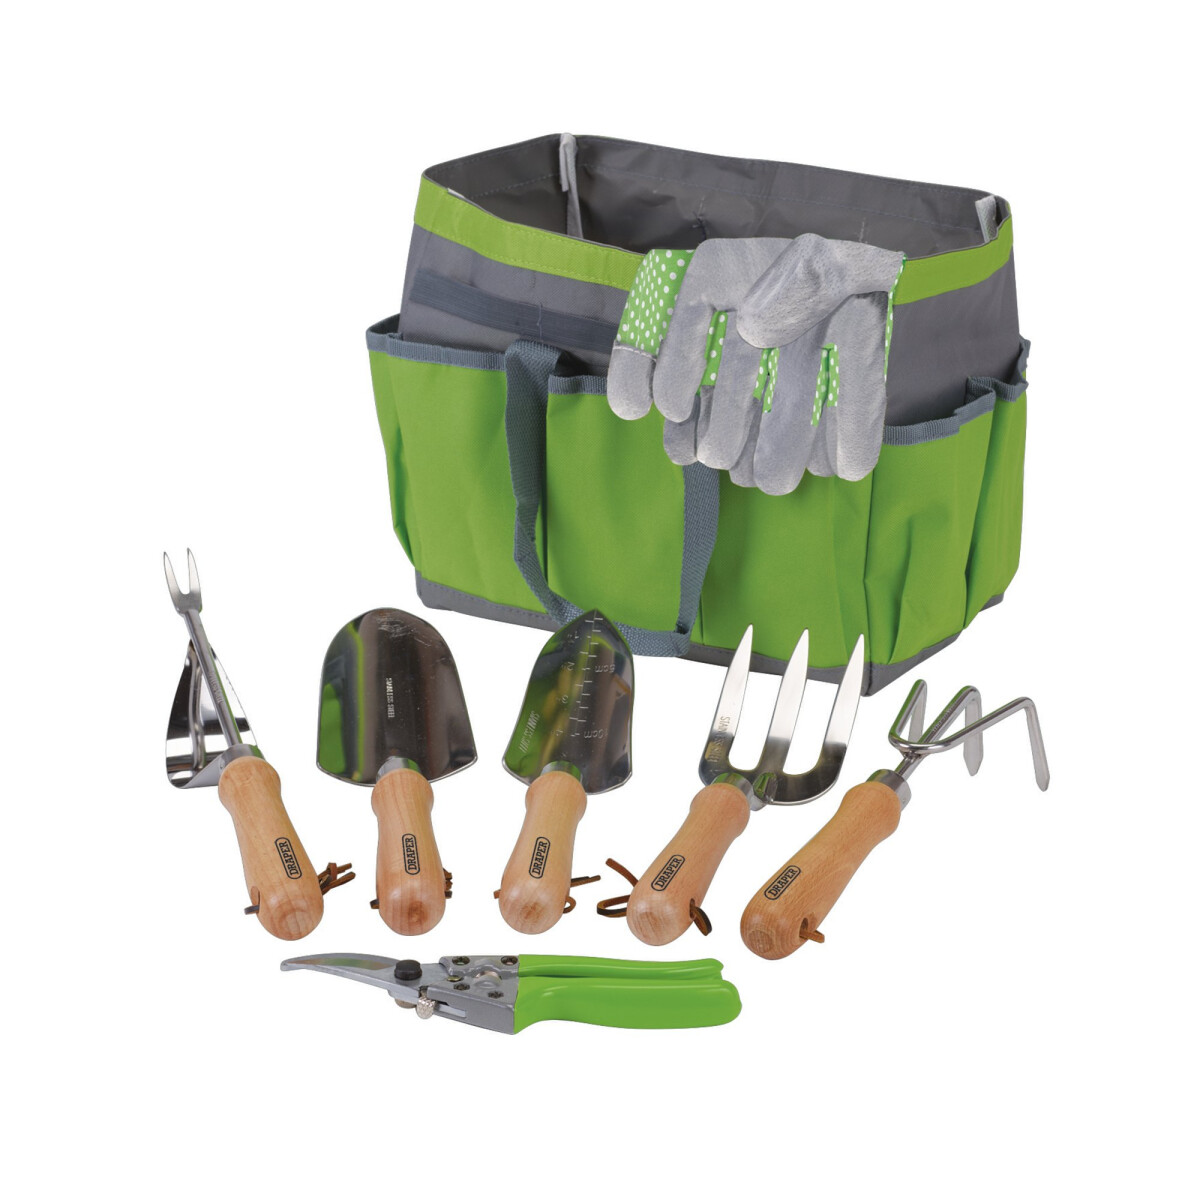 Draper 08997 HGTS/8 Stainless Steel Garden Tool Set With Storage Bag (8 Piece)